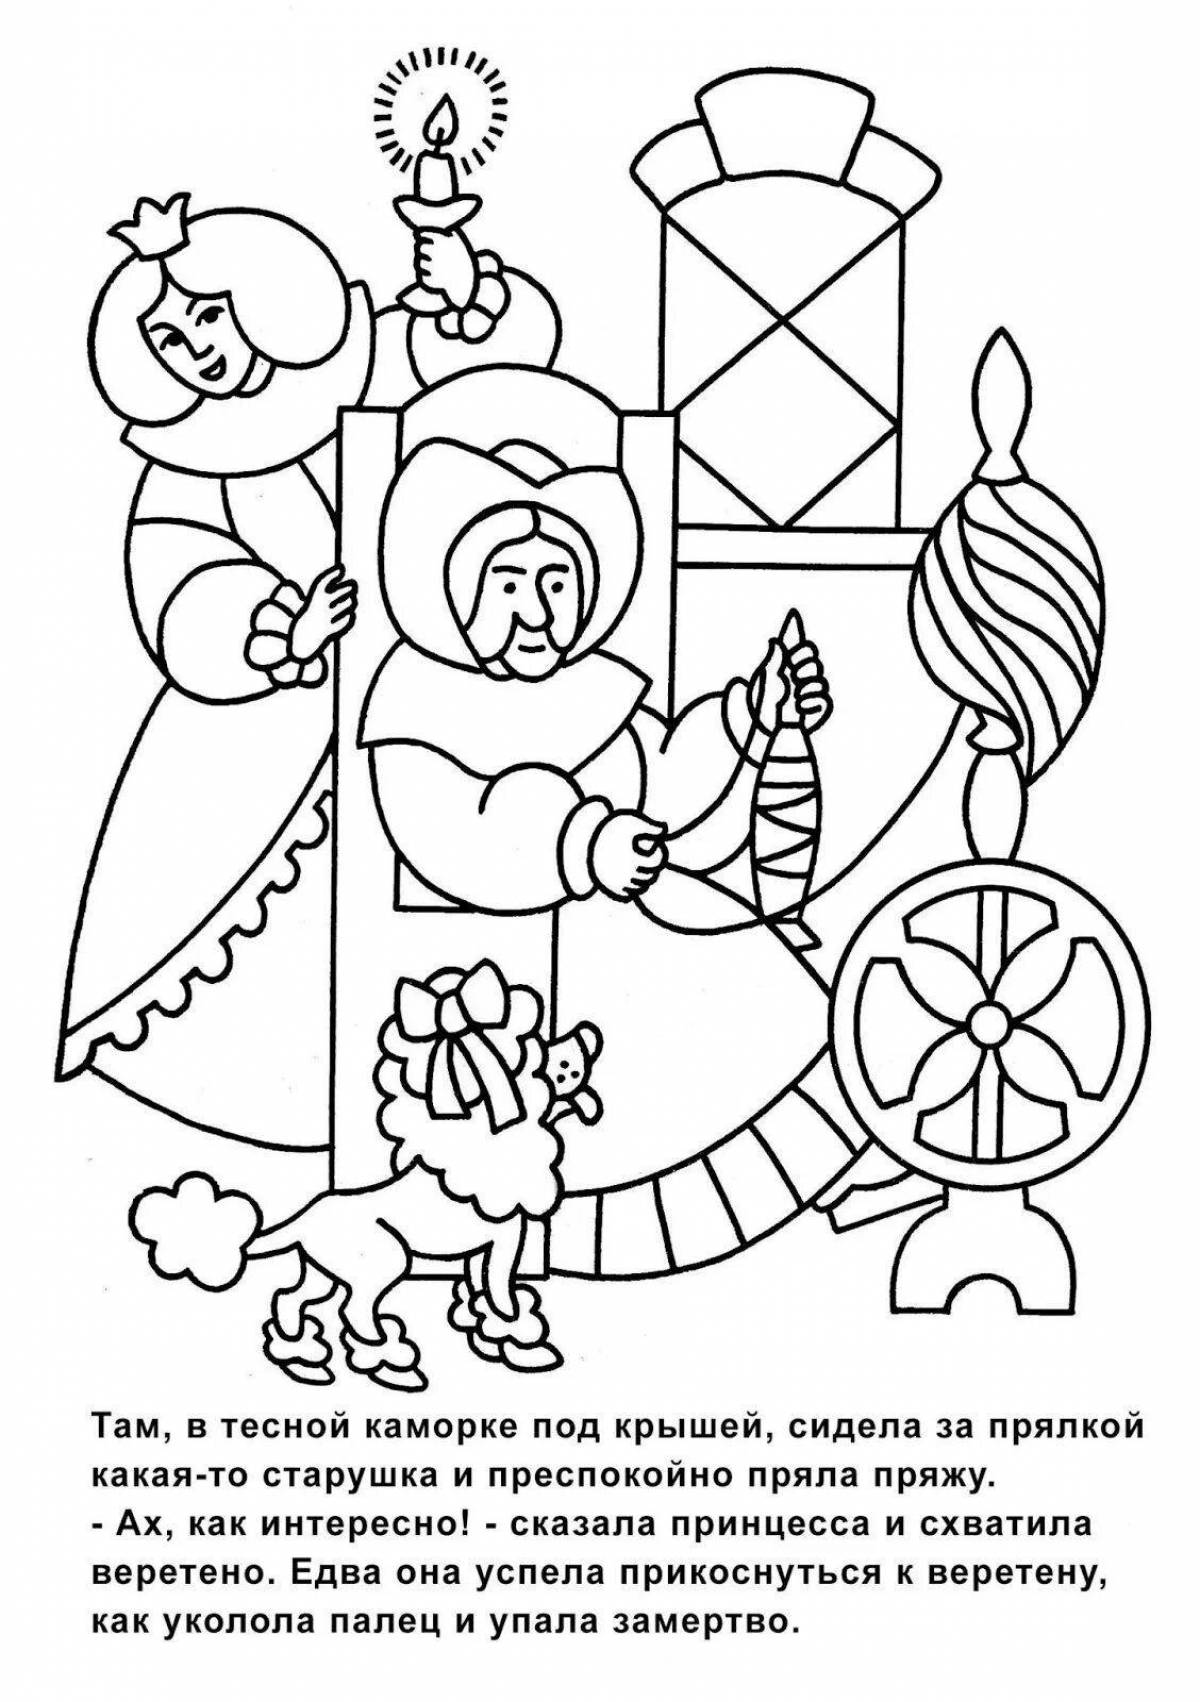 Majestic coloring book from perrault's tales